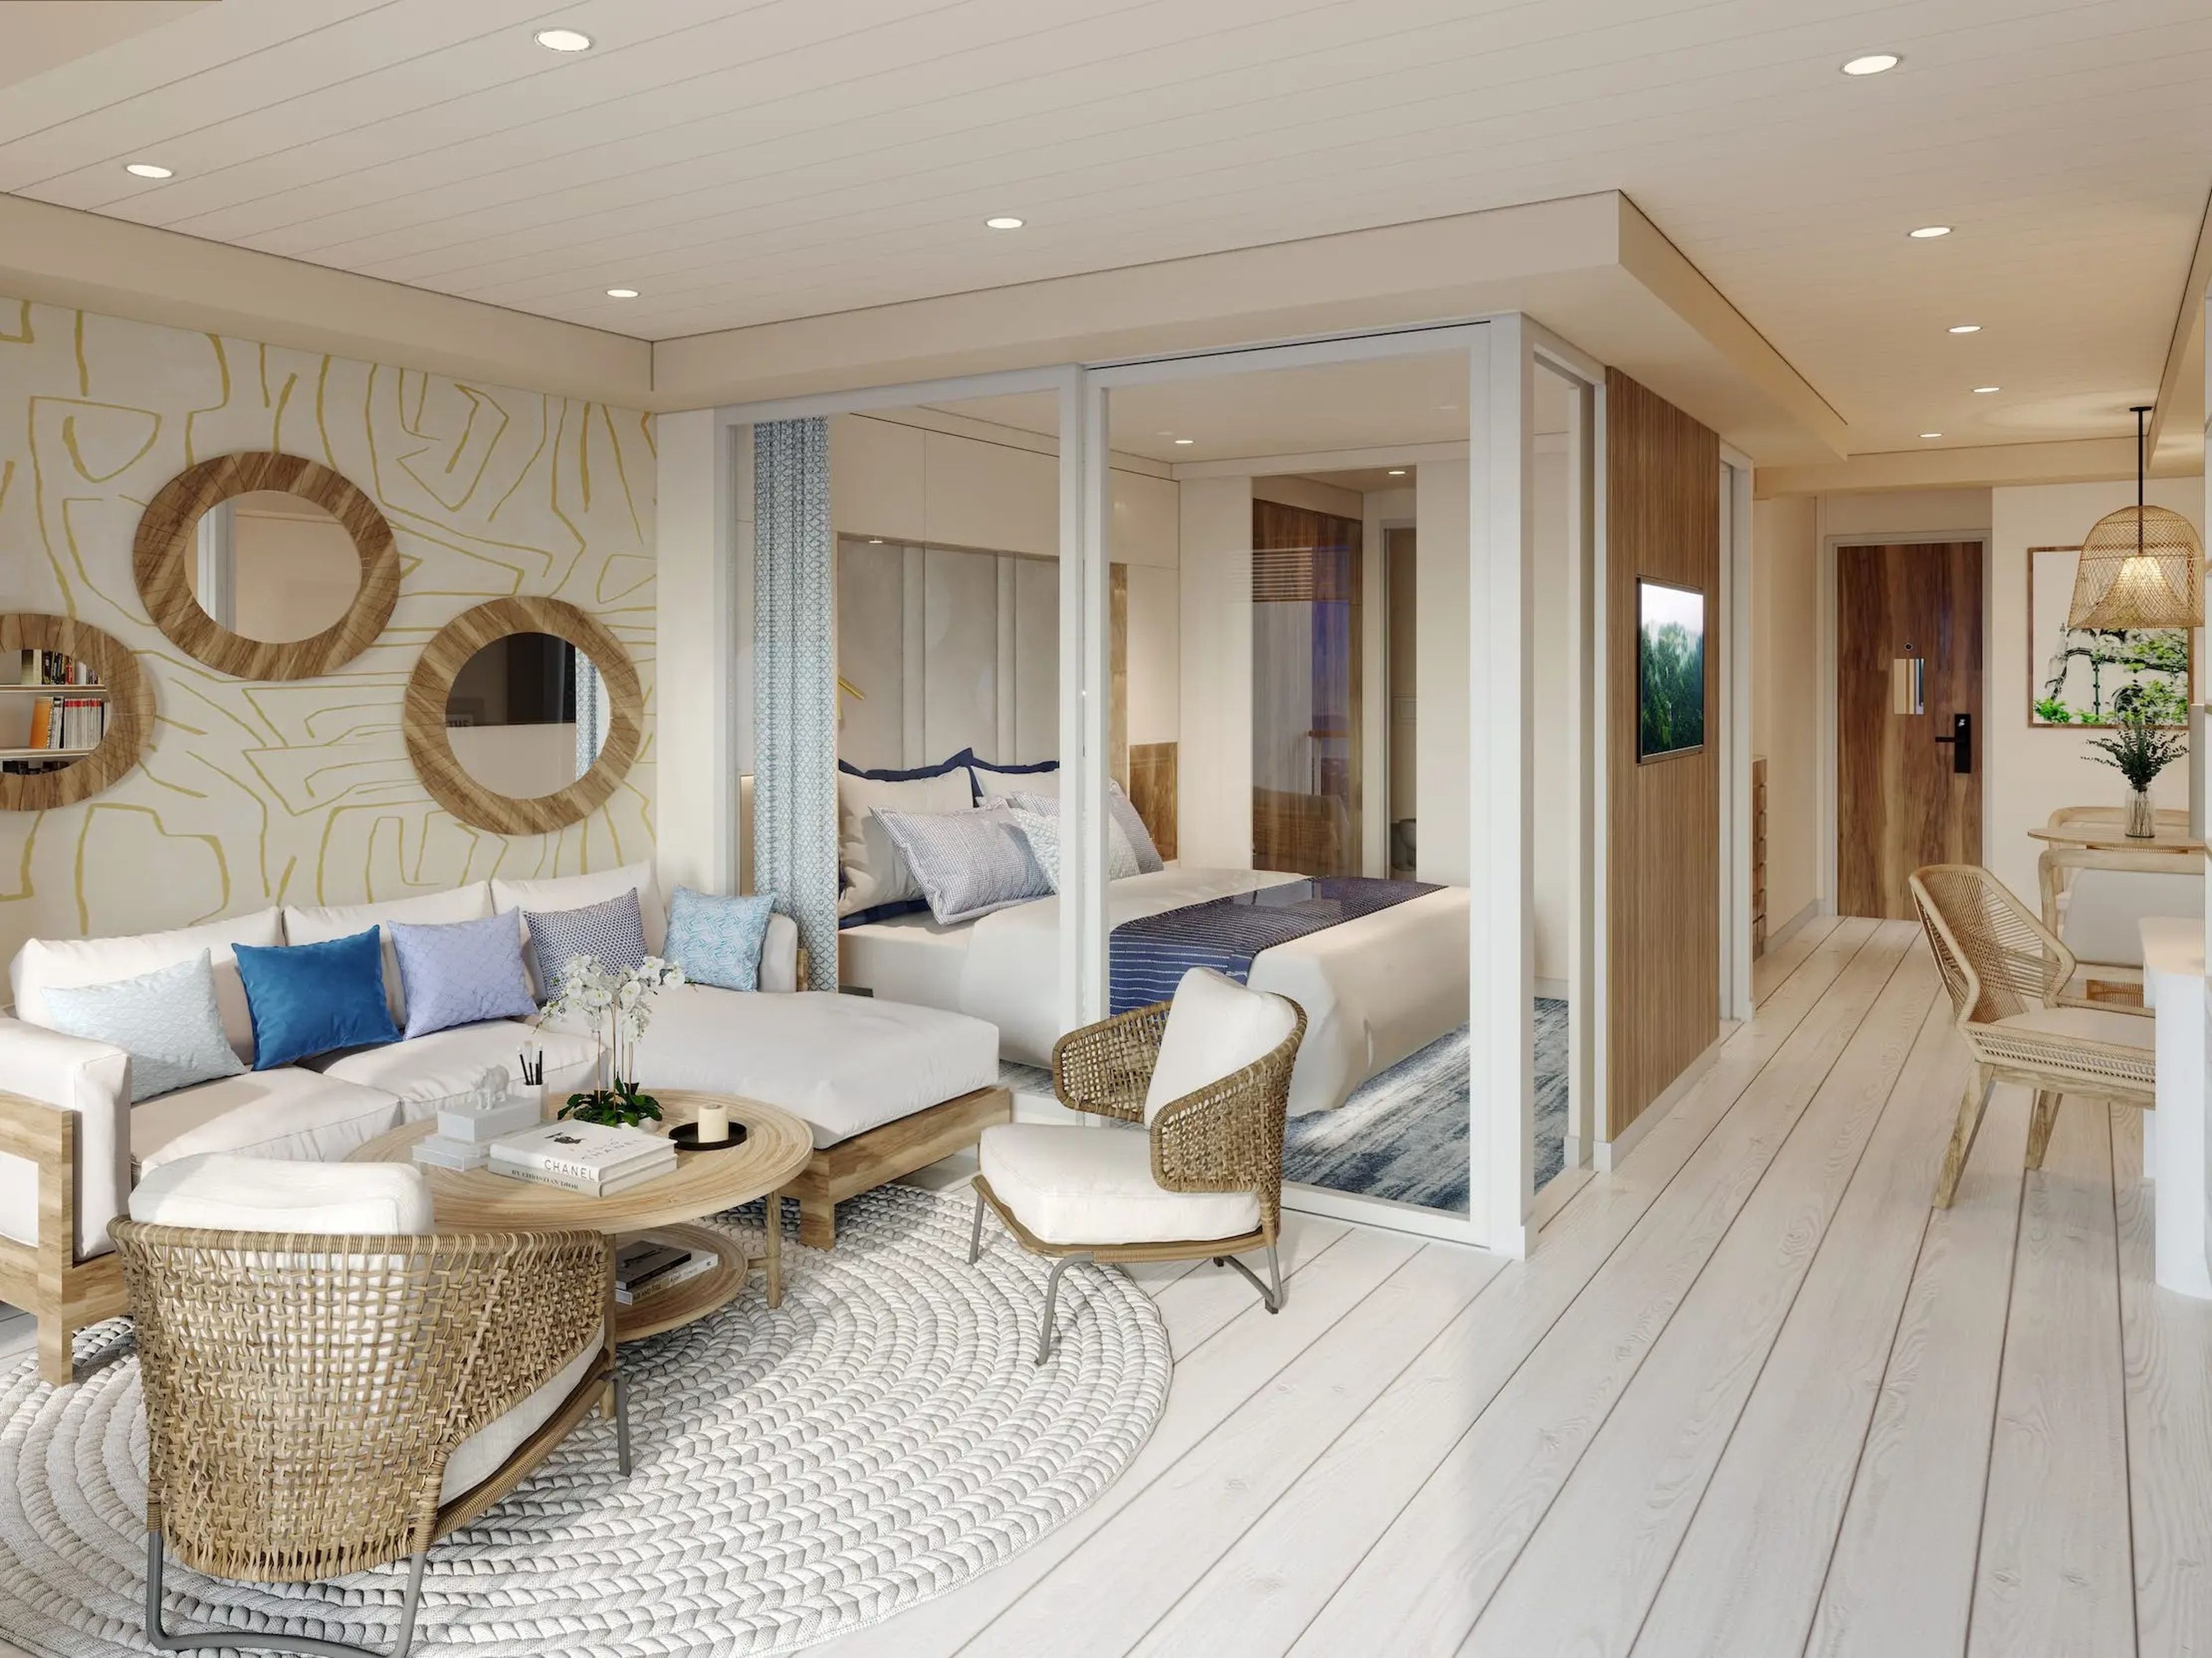 A rendering of the living room in Storylines' MV Narrative cruise ship.